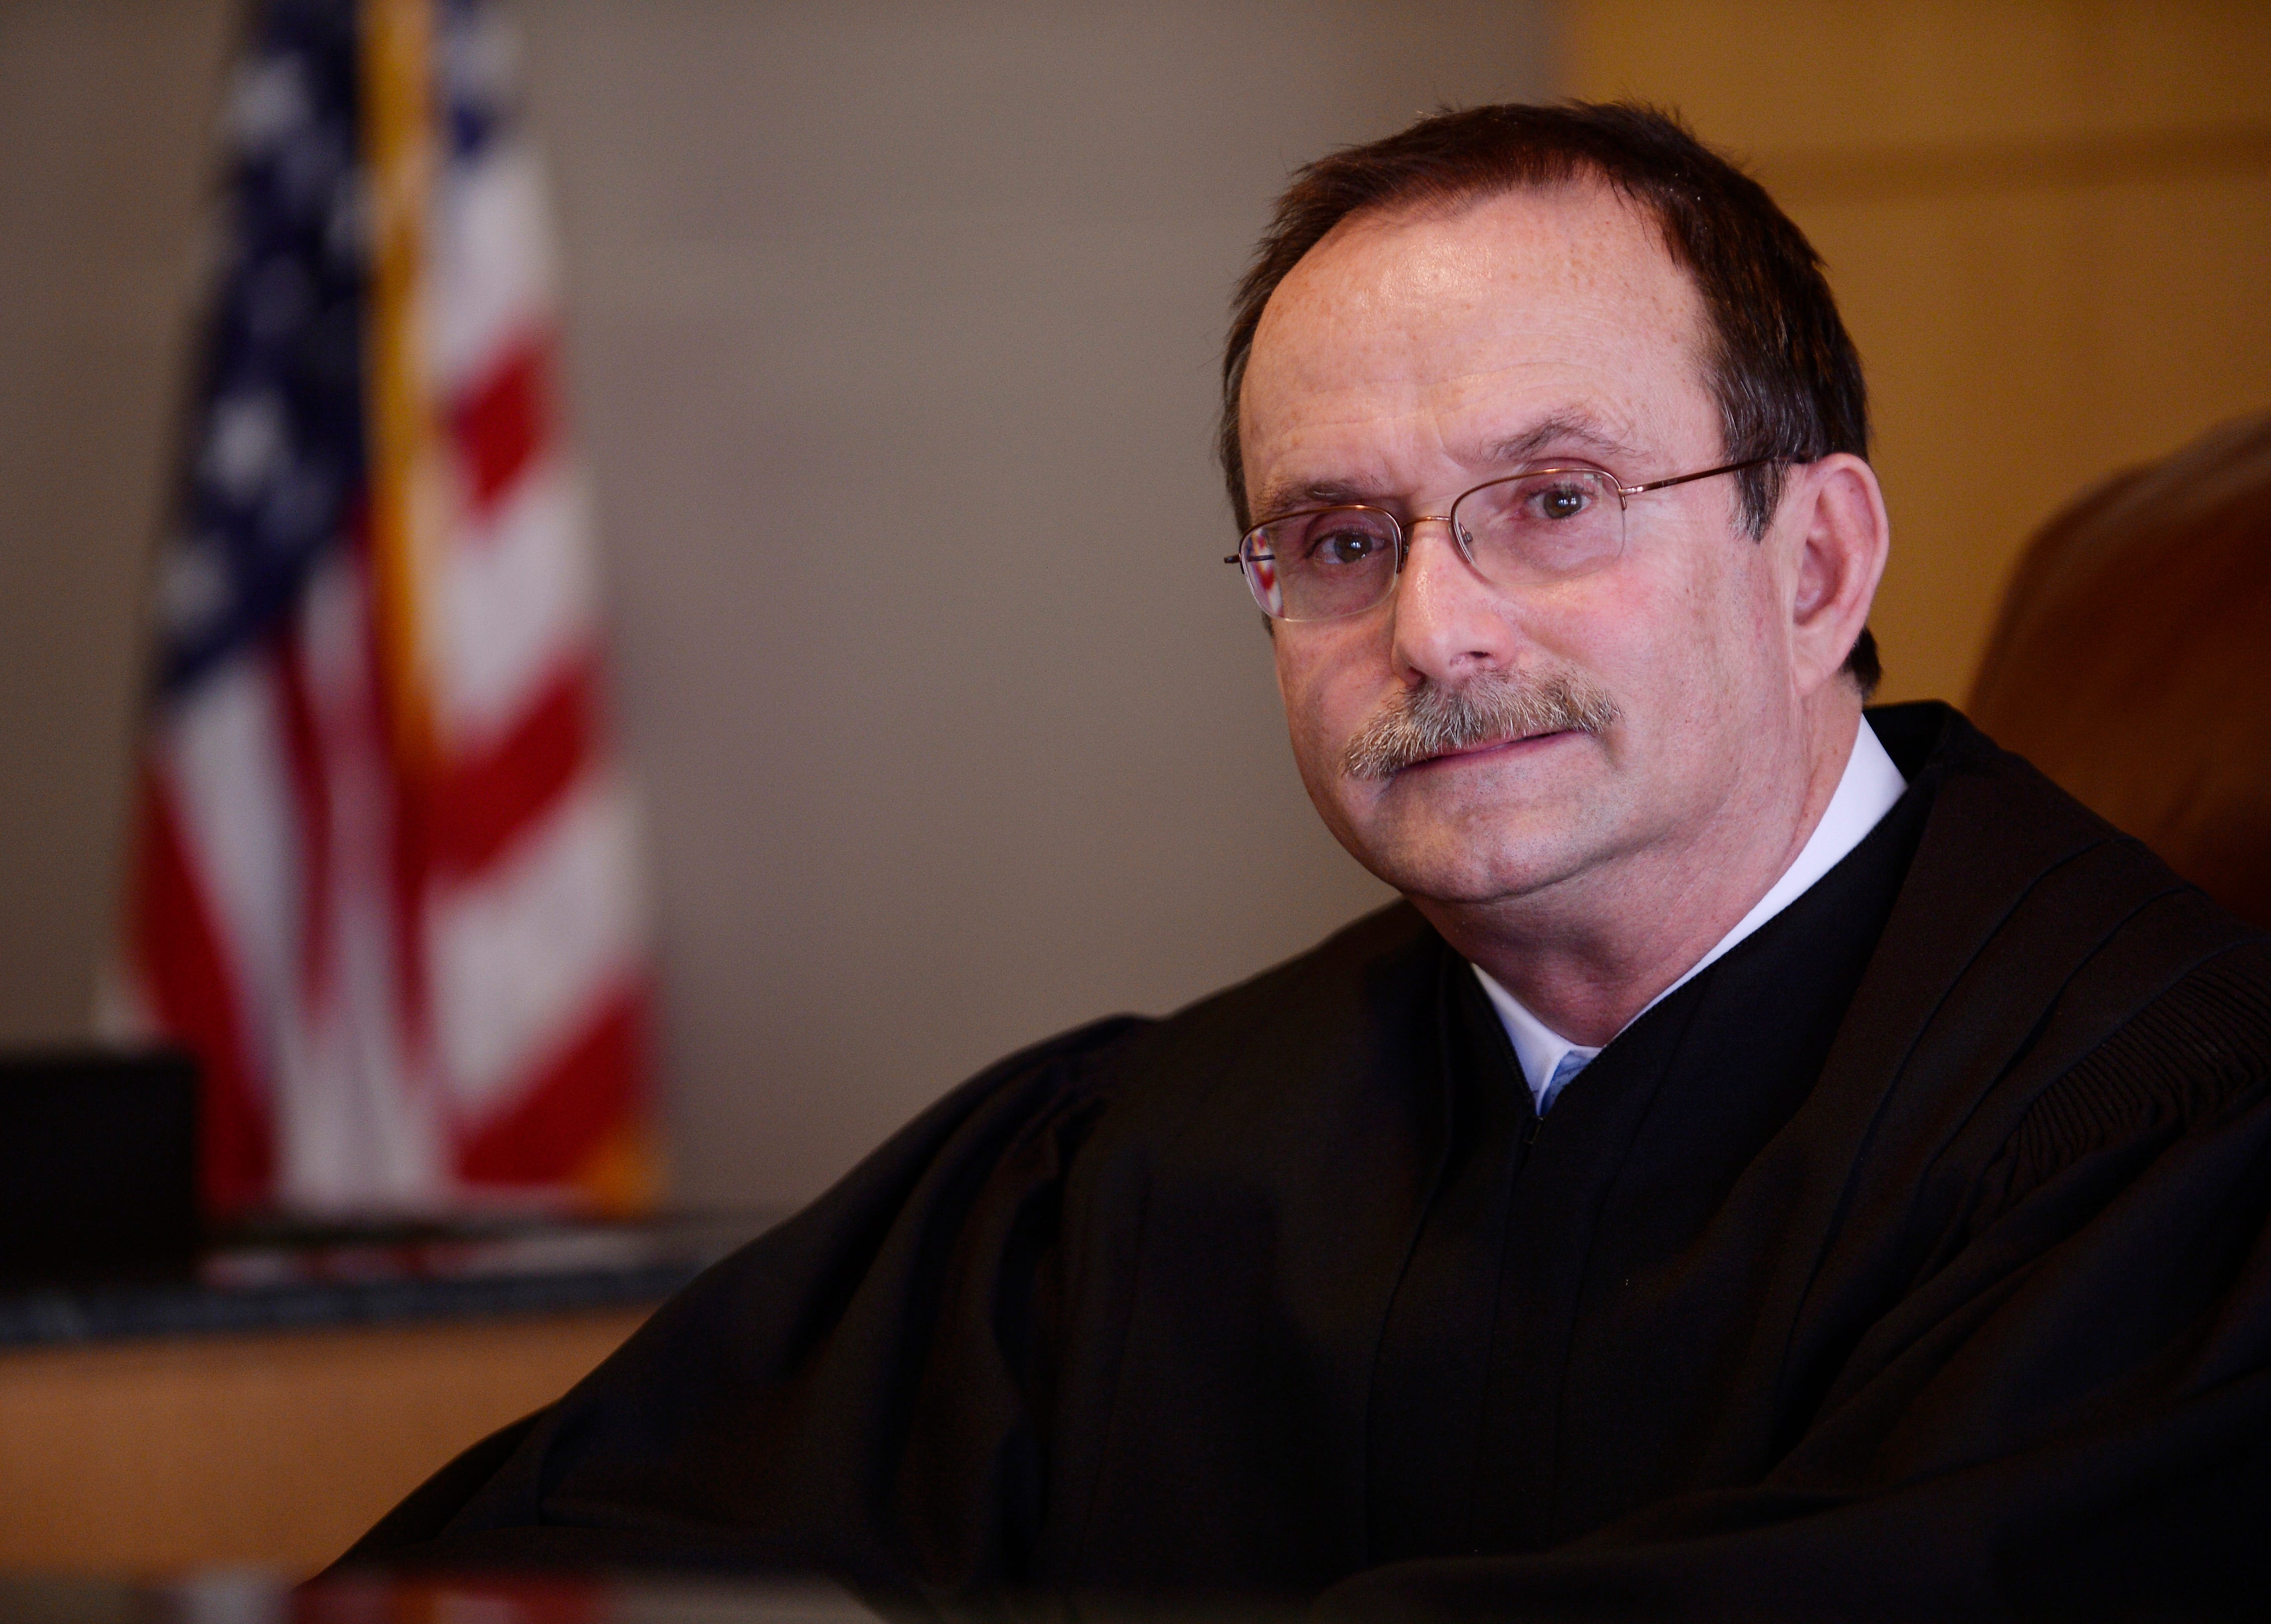 Longtime Wayne Circuit Court Judge Robert Colombo Jr. is retiring from the bench by early next year, state officials announced Wednesday.